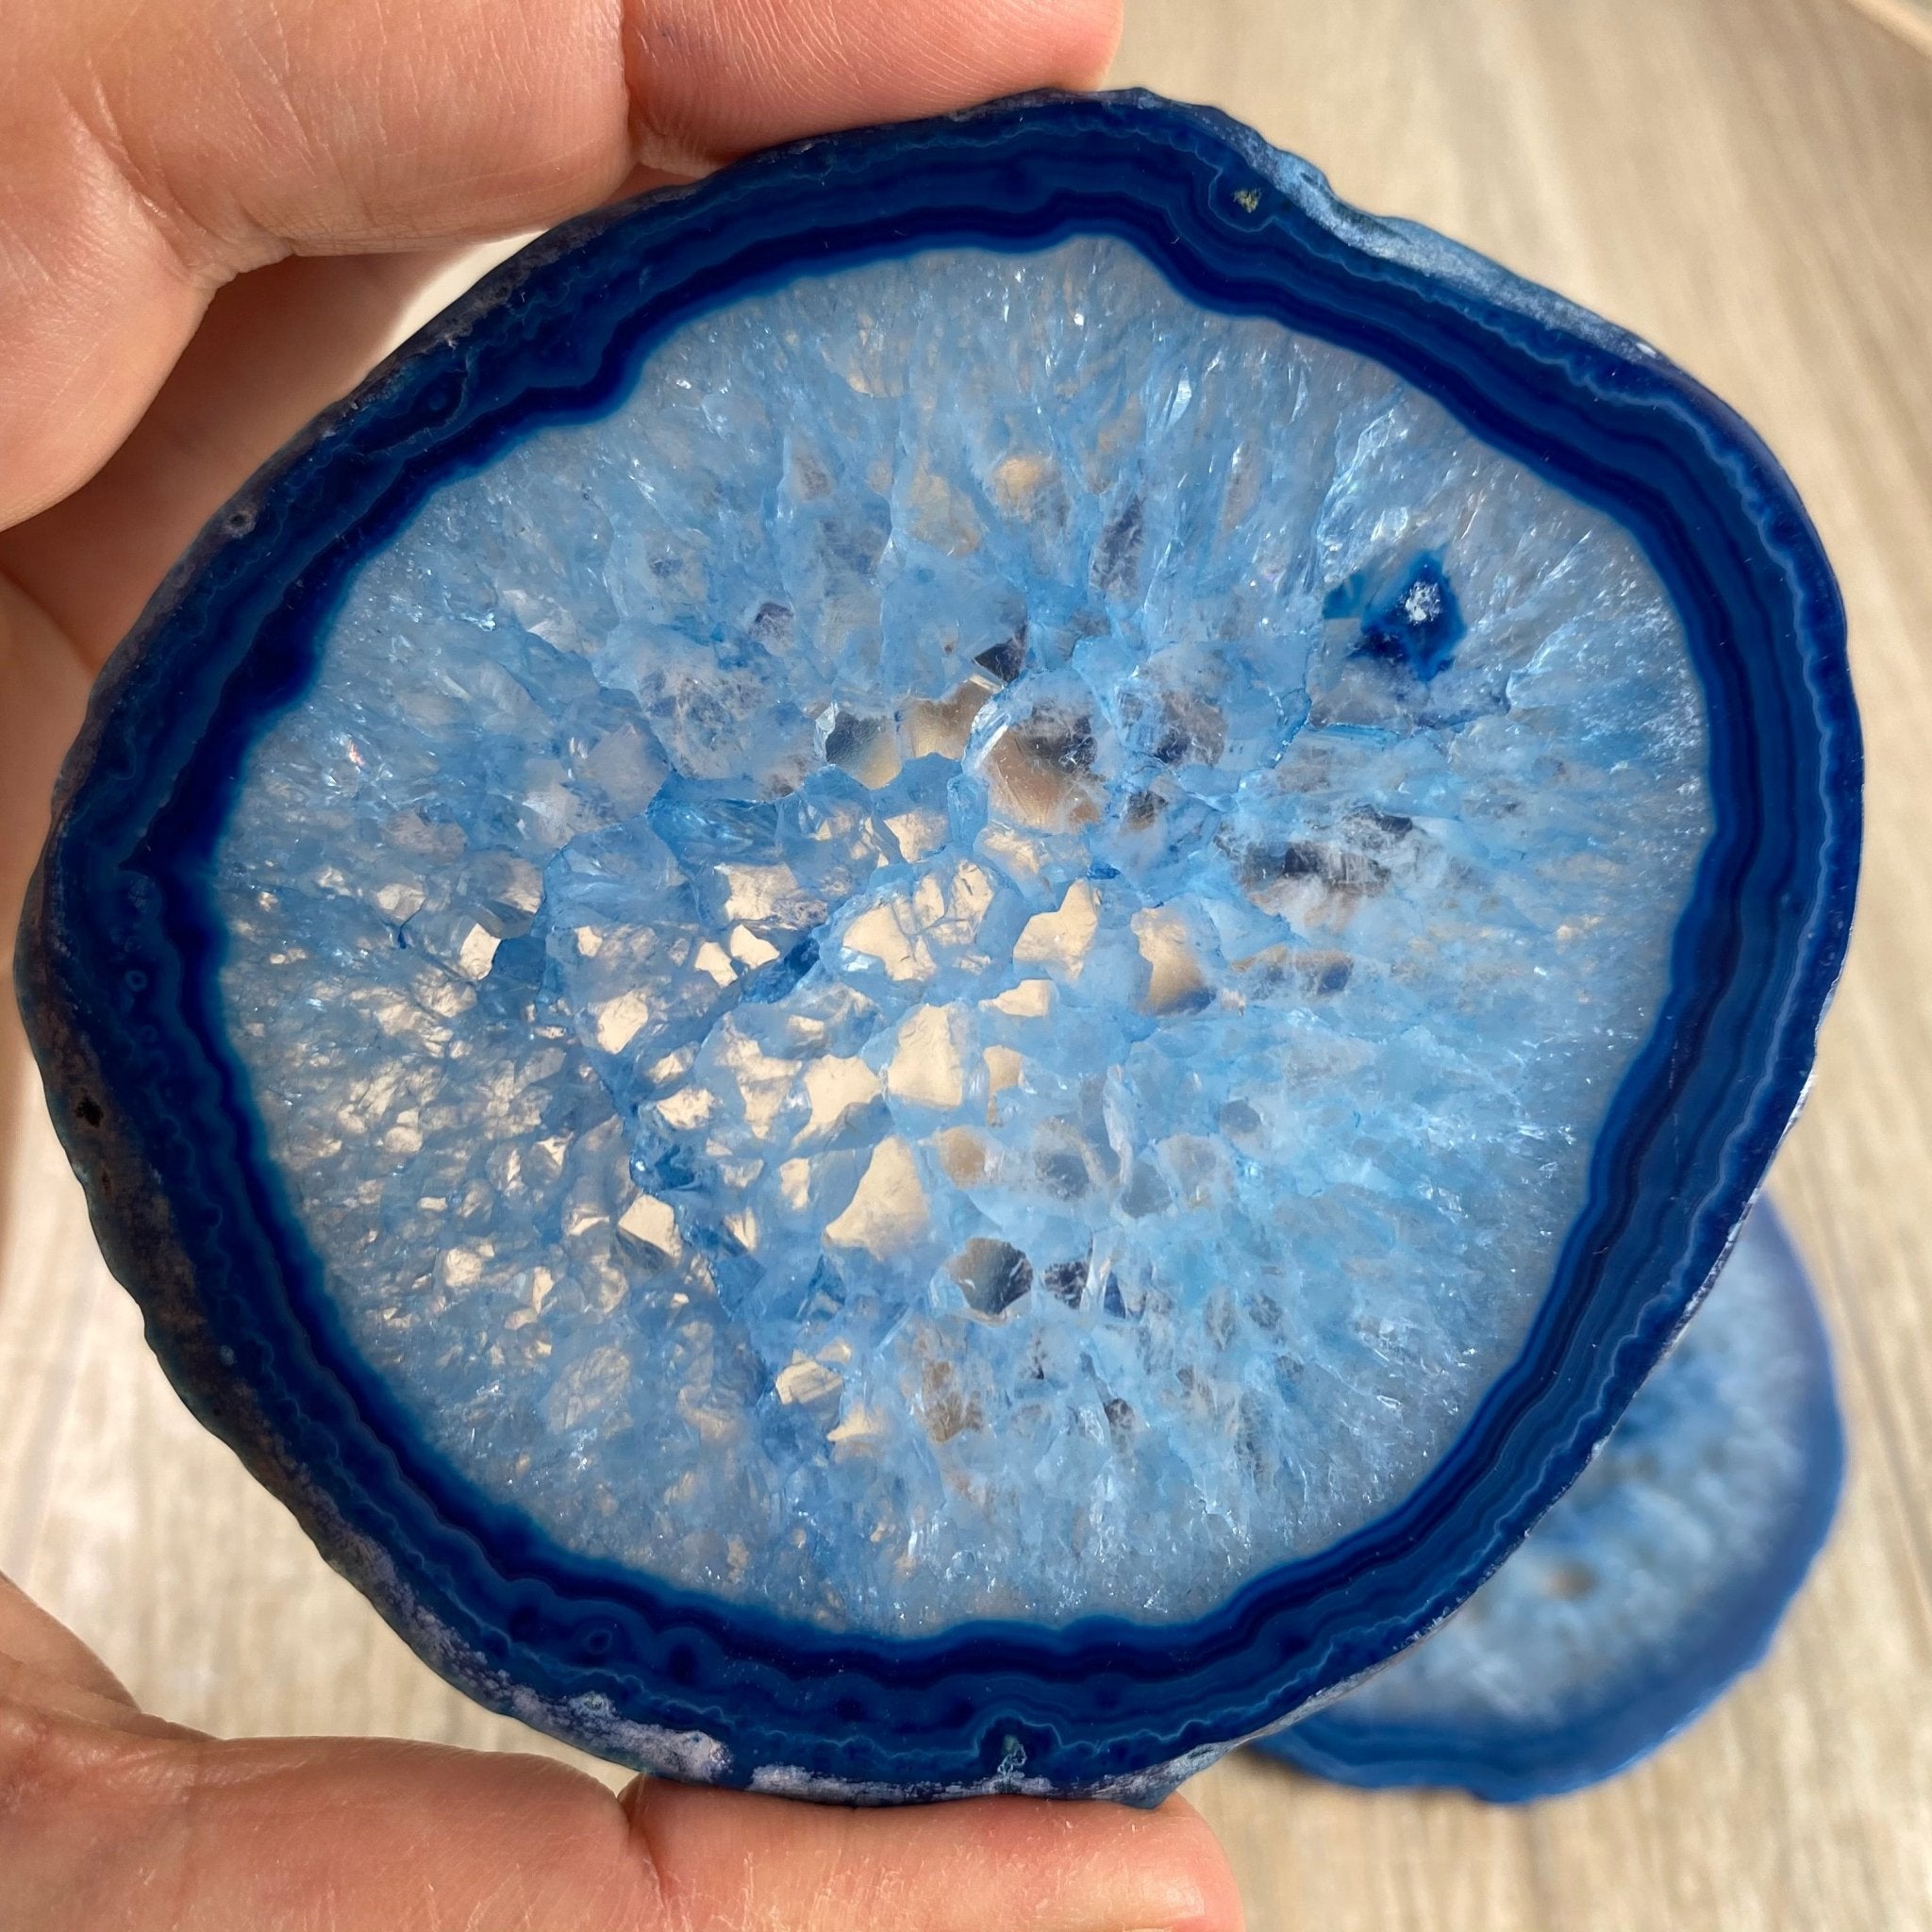 Blue Agate Coasters w/ silicone bumpers, 3.5" to 4.5" each, 4-piece set Model #5204BLUE by Brazil Gems - Brazil GemsBrazil GemsBlue Agate Coasters w/ silicone bumpers, 3.5" to 4.5" each, 4-piece set Model #5204BLUE by Brazil GemsCoaster Sets5204BLUE